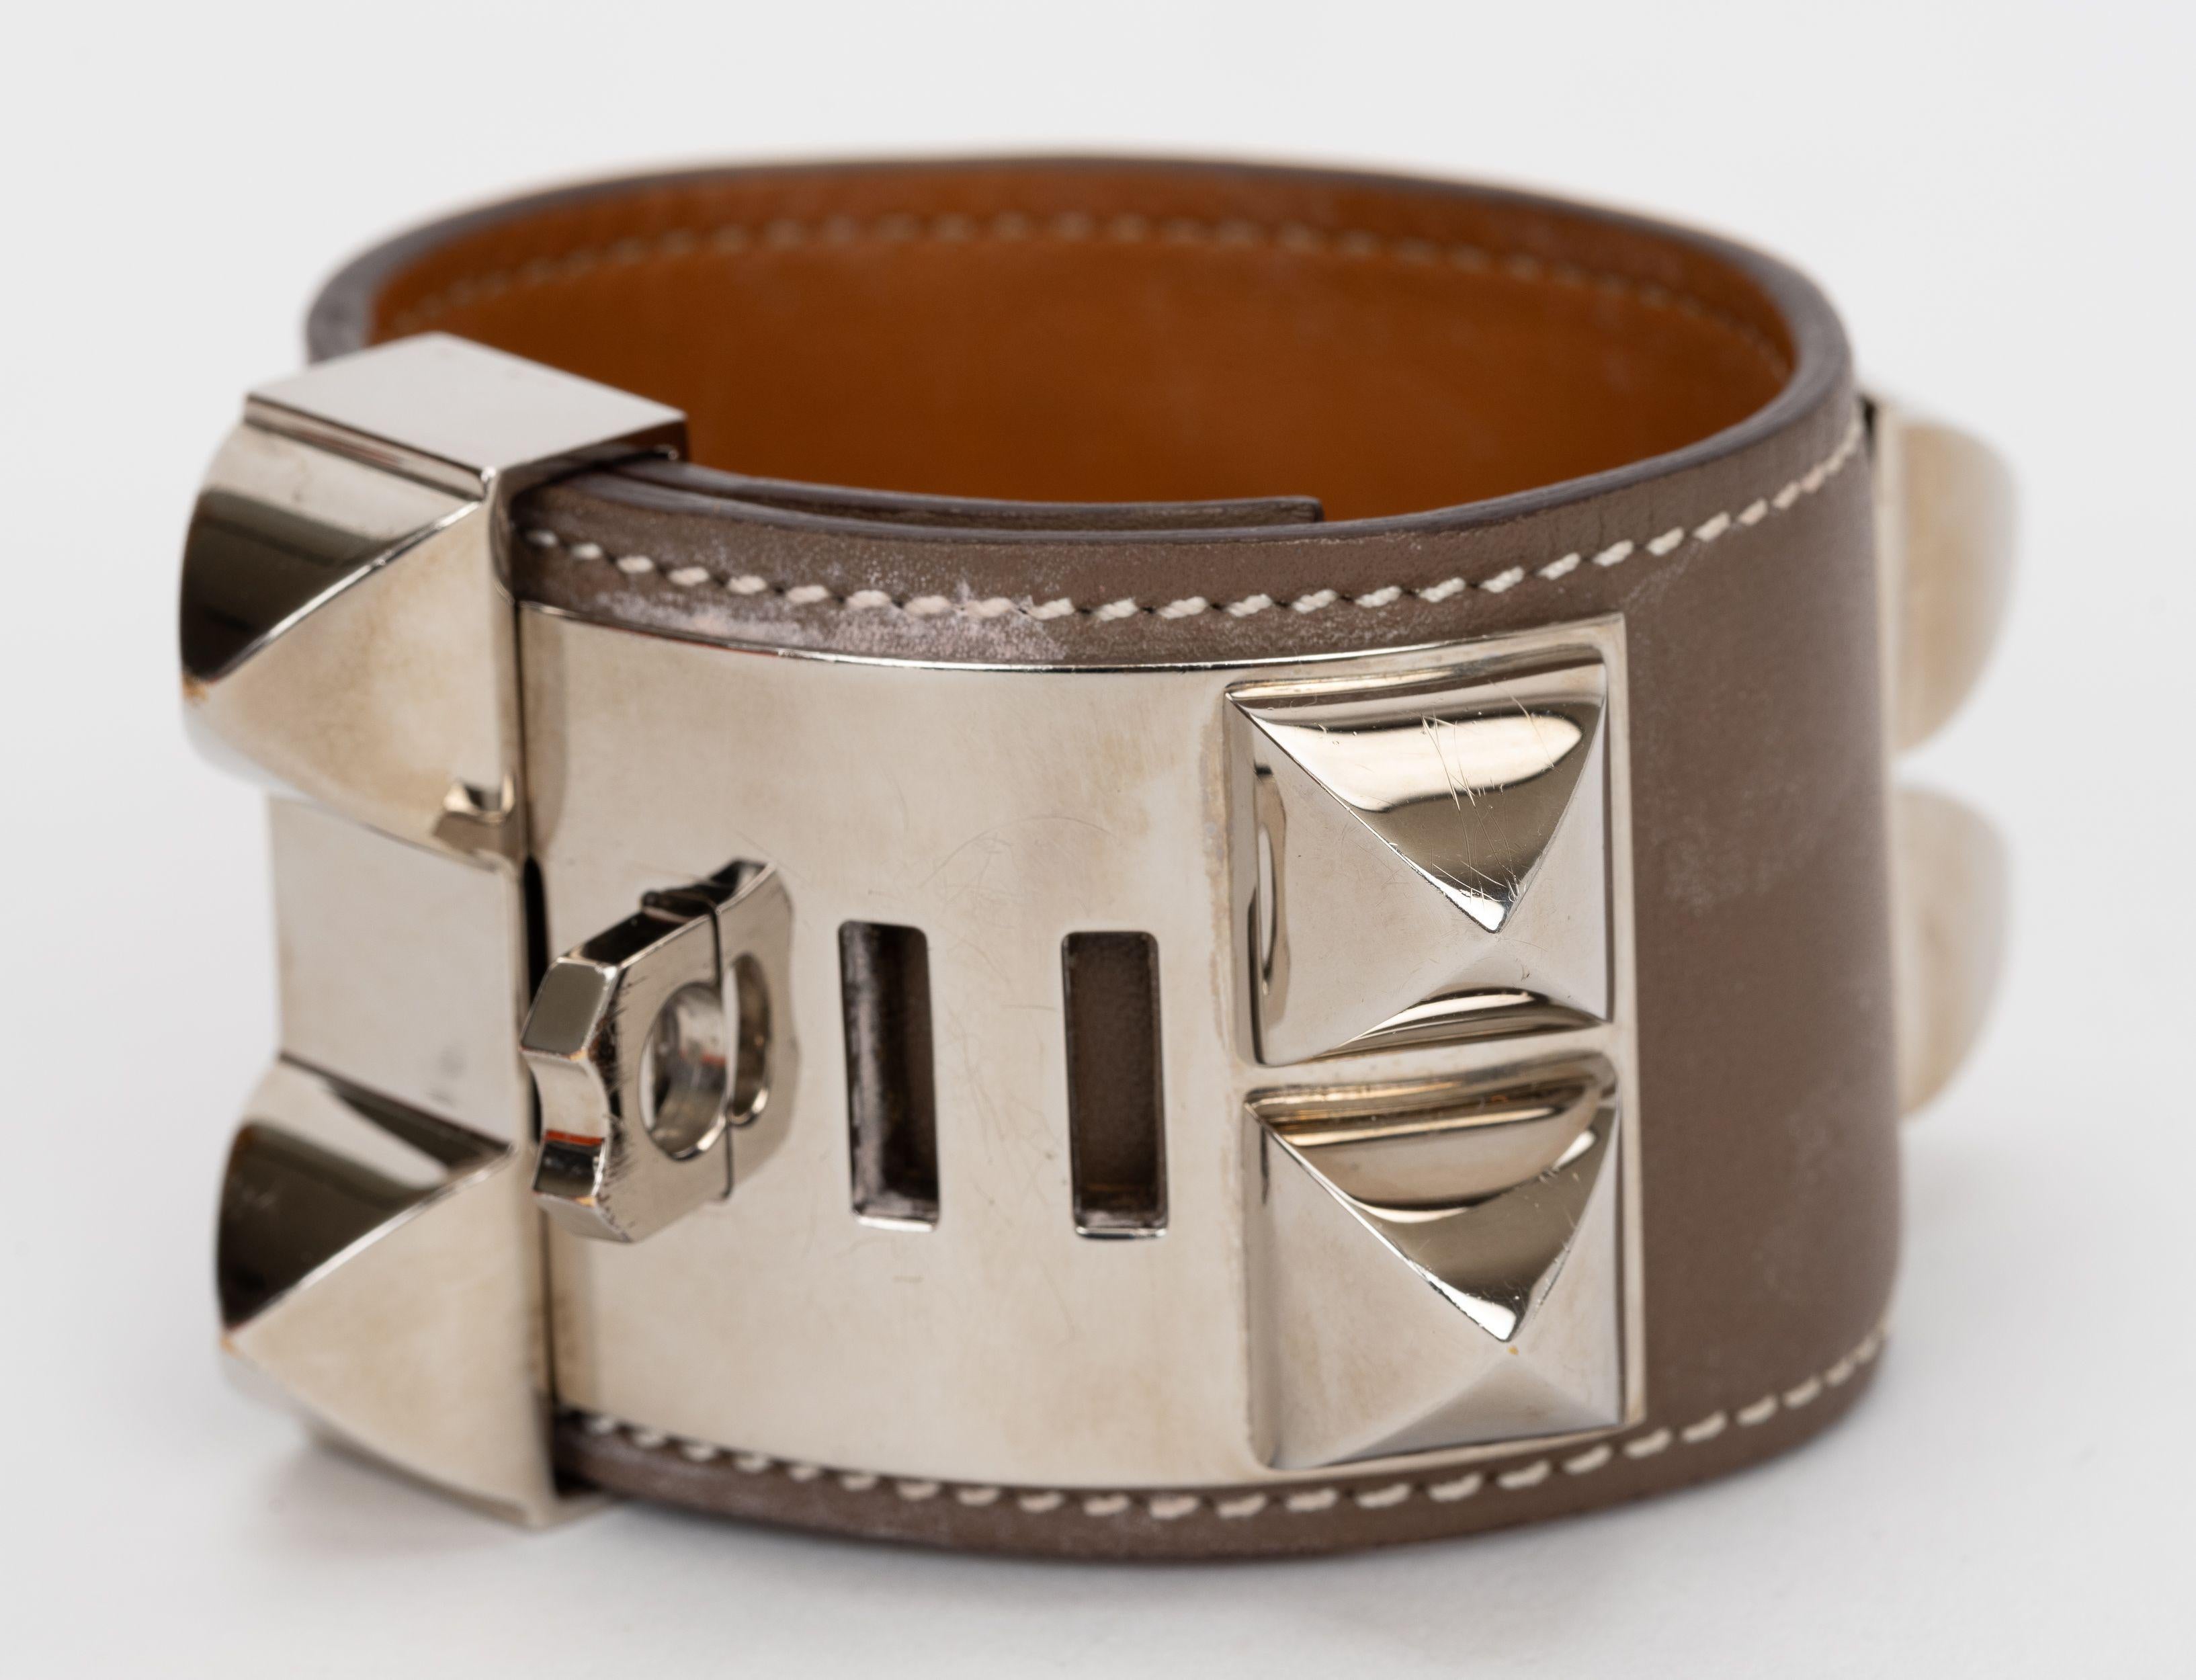 Hermes etoupe leather Collier De Chien Bracelet with palladium hardware. Date stamp M.
Comes with original pouch.